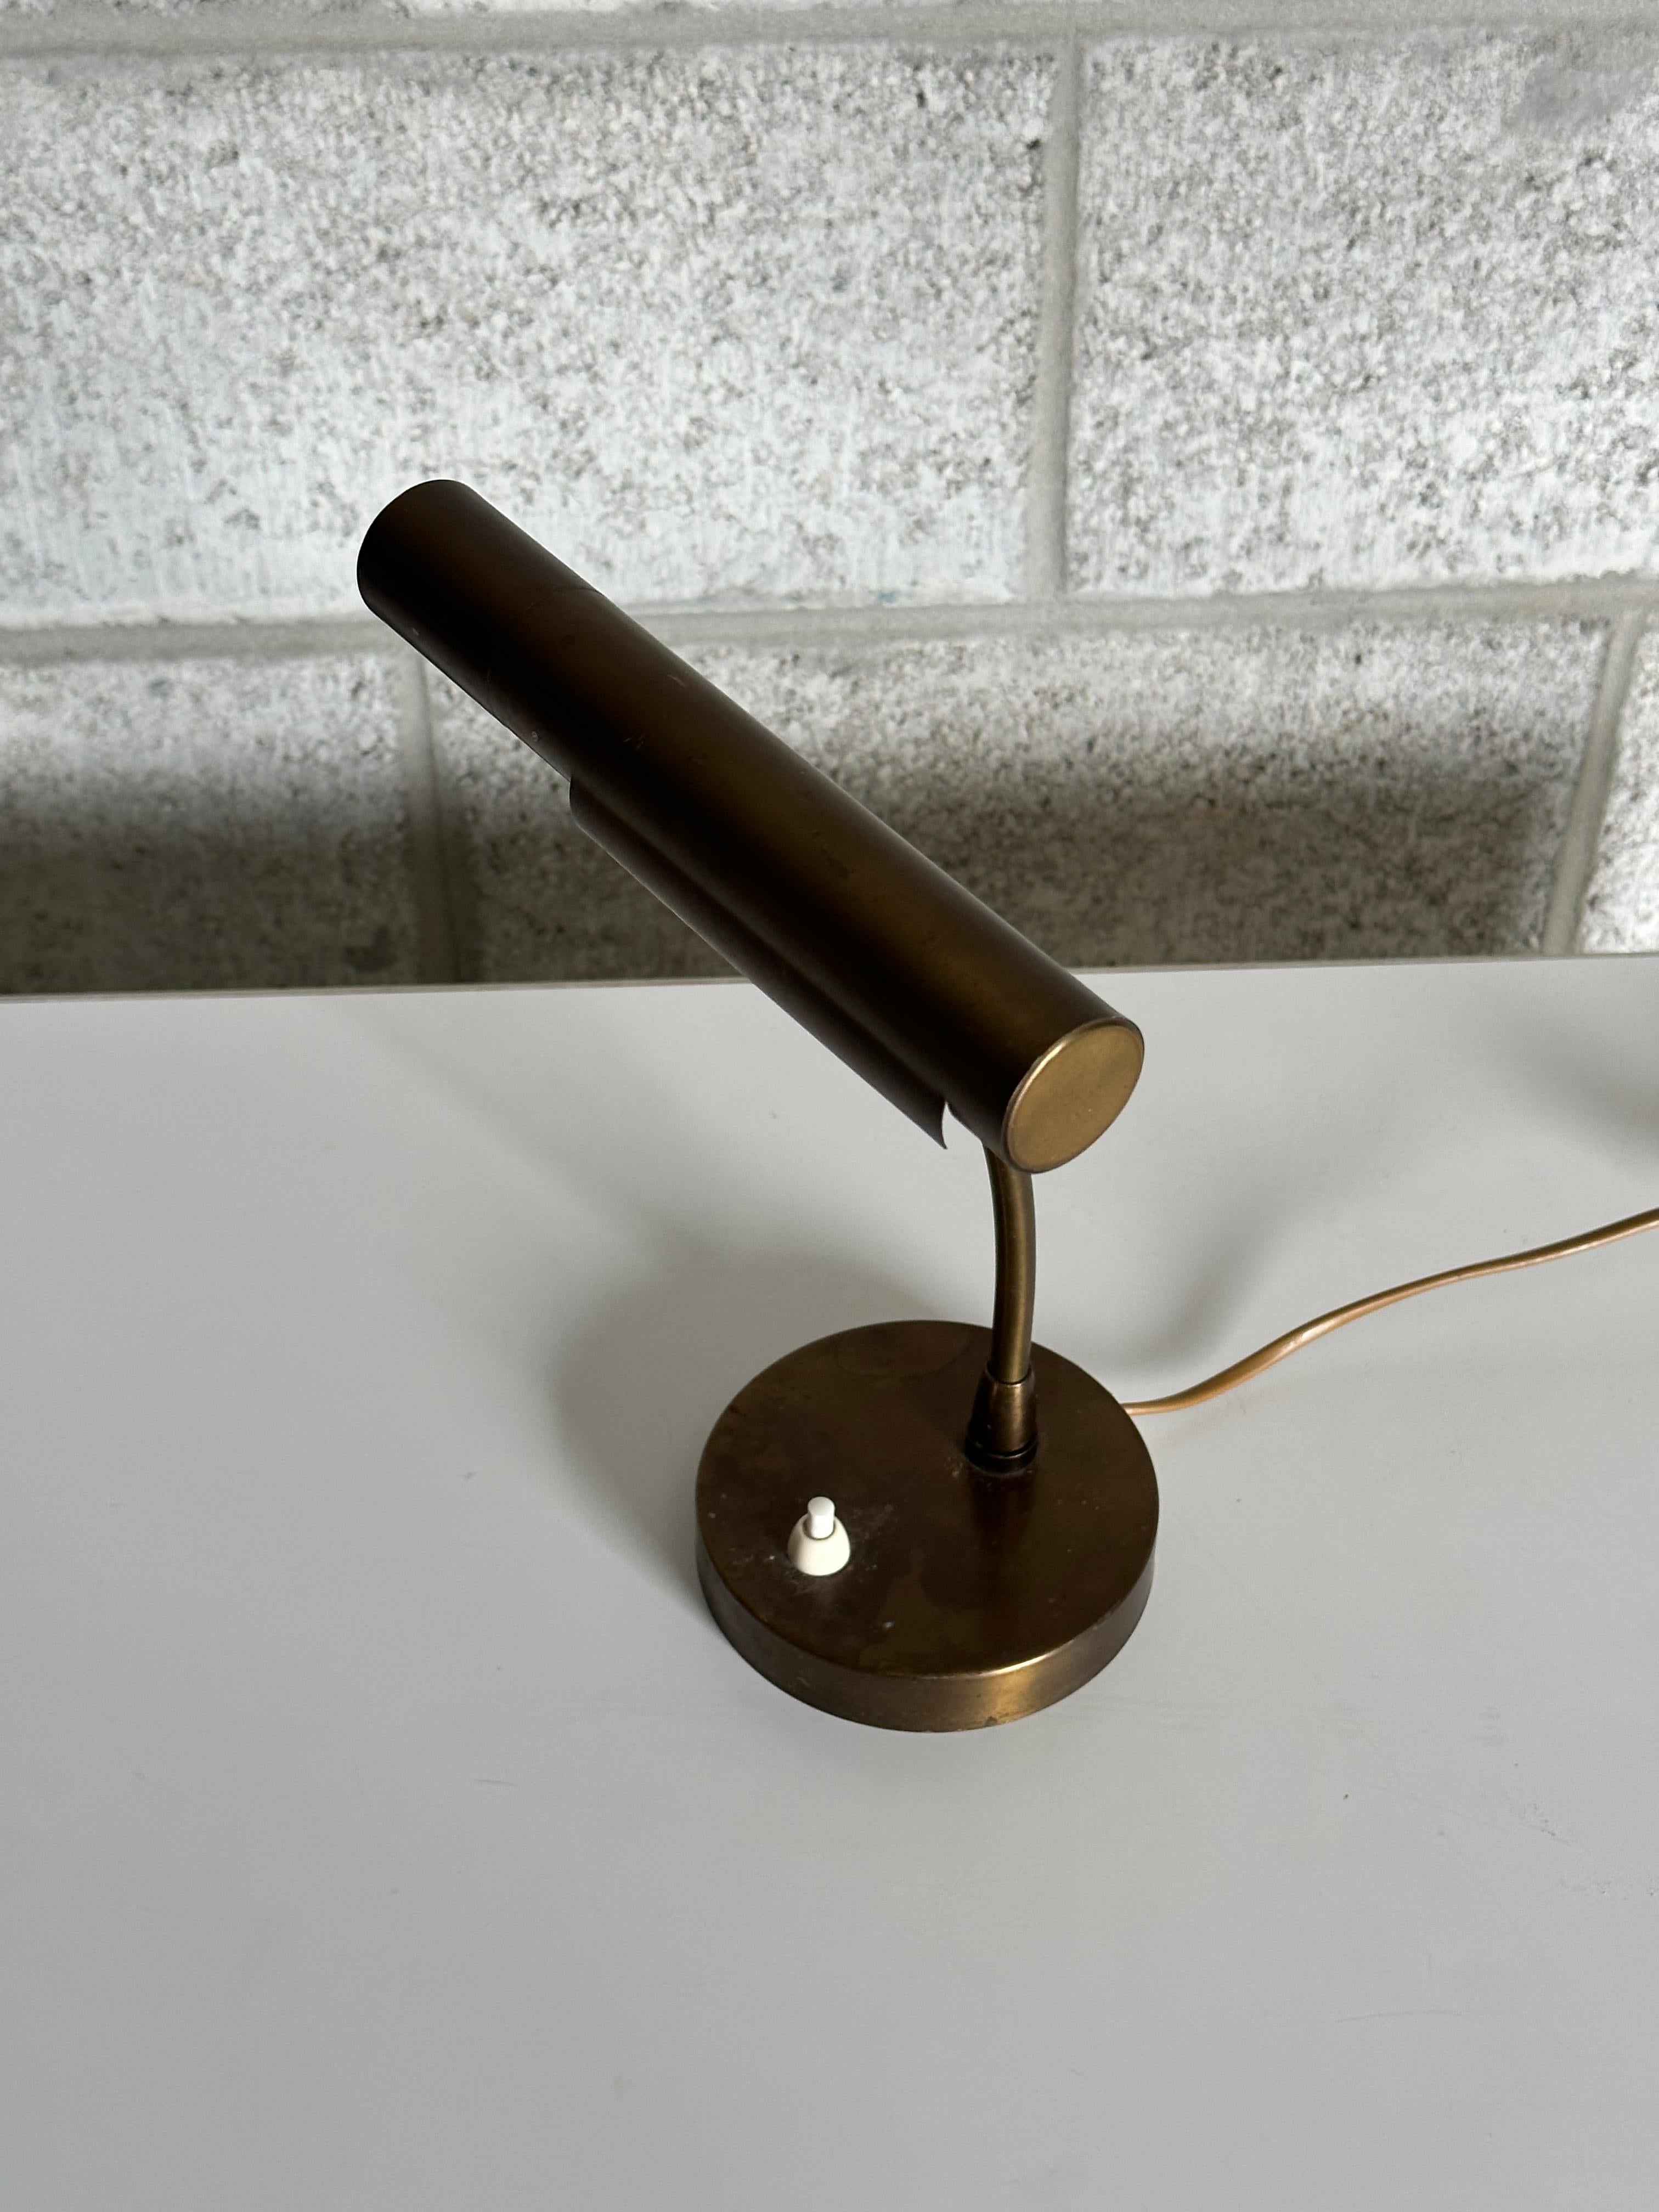 1940s Swedish Modern Brass Desk or Banker/ Table Lamp by Asea For Sale 4